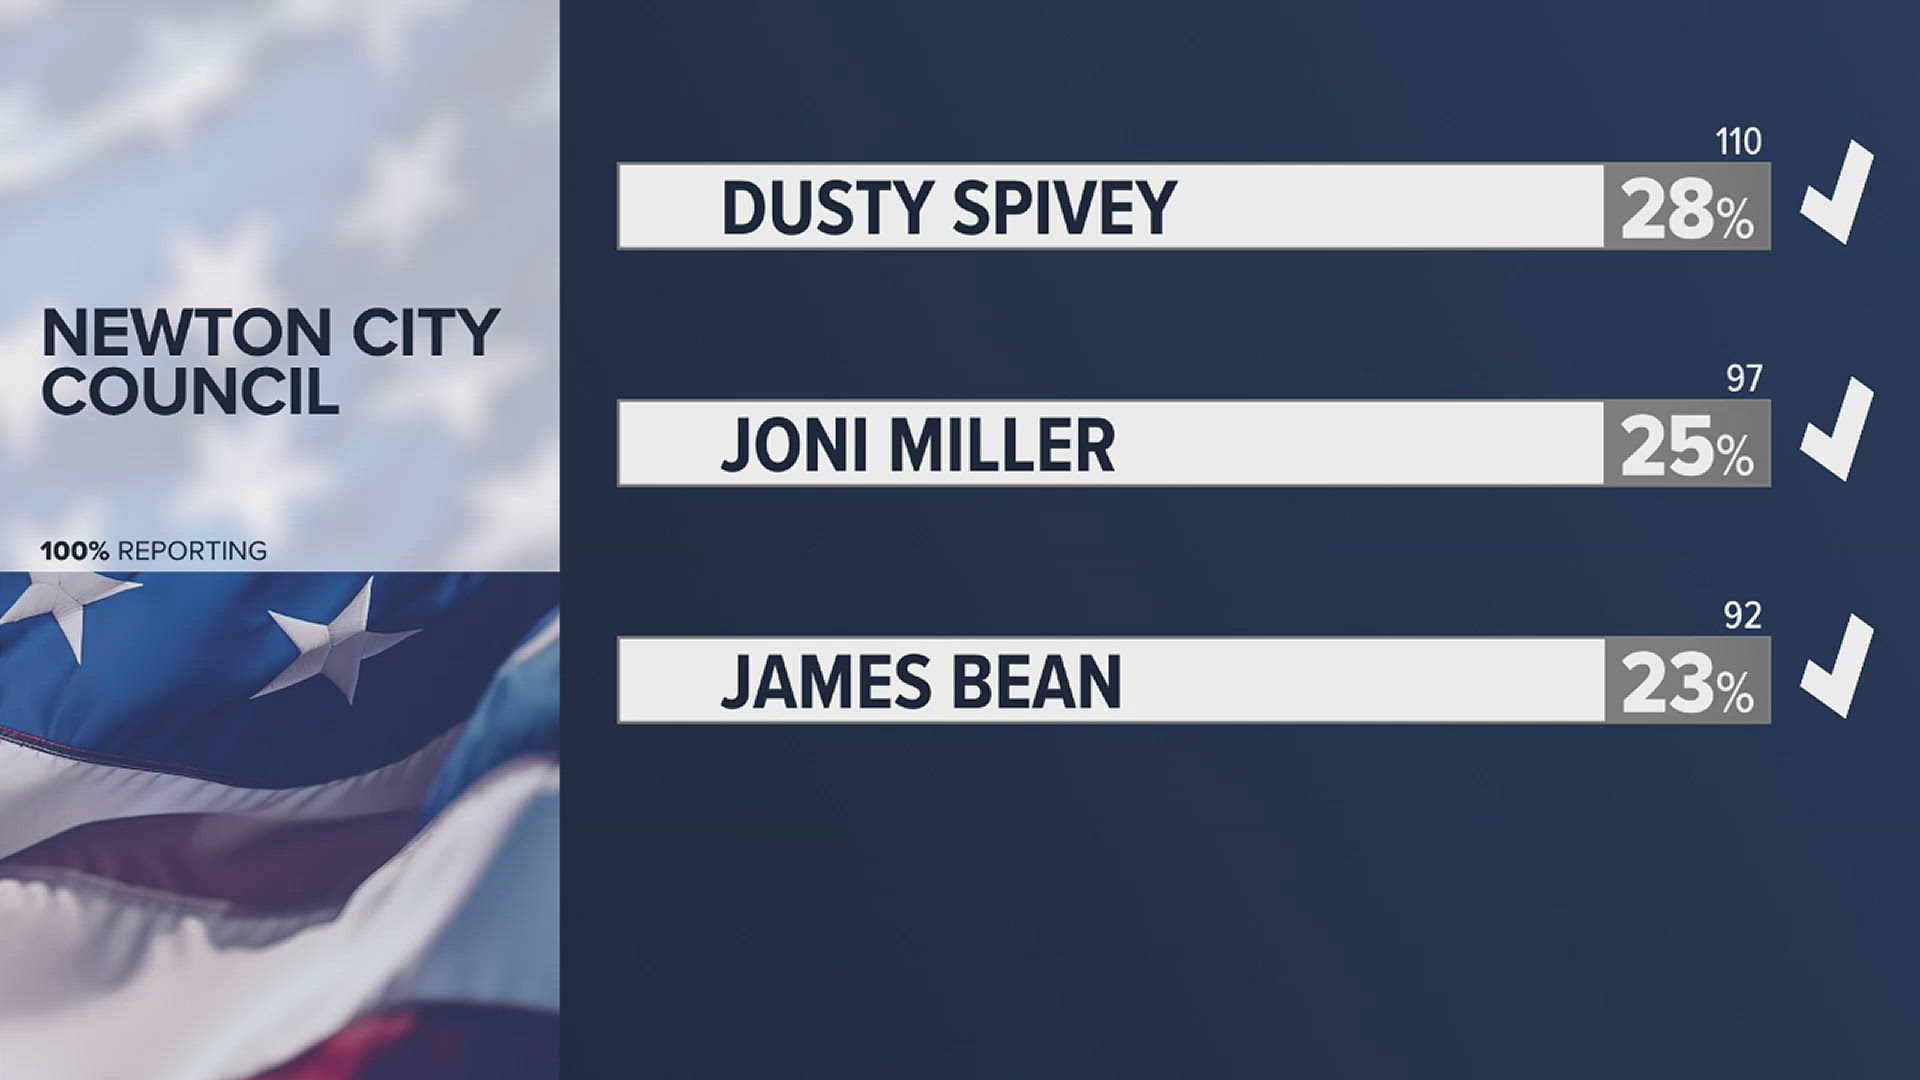 Dusty Spivey, Joni Miller, and James Bean join the council